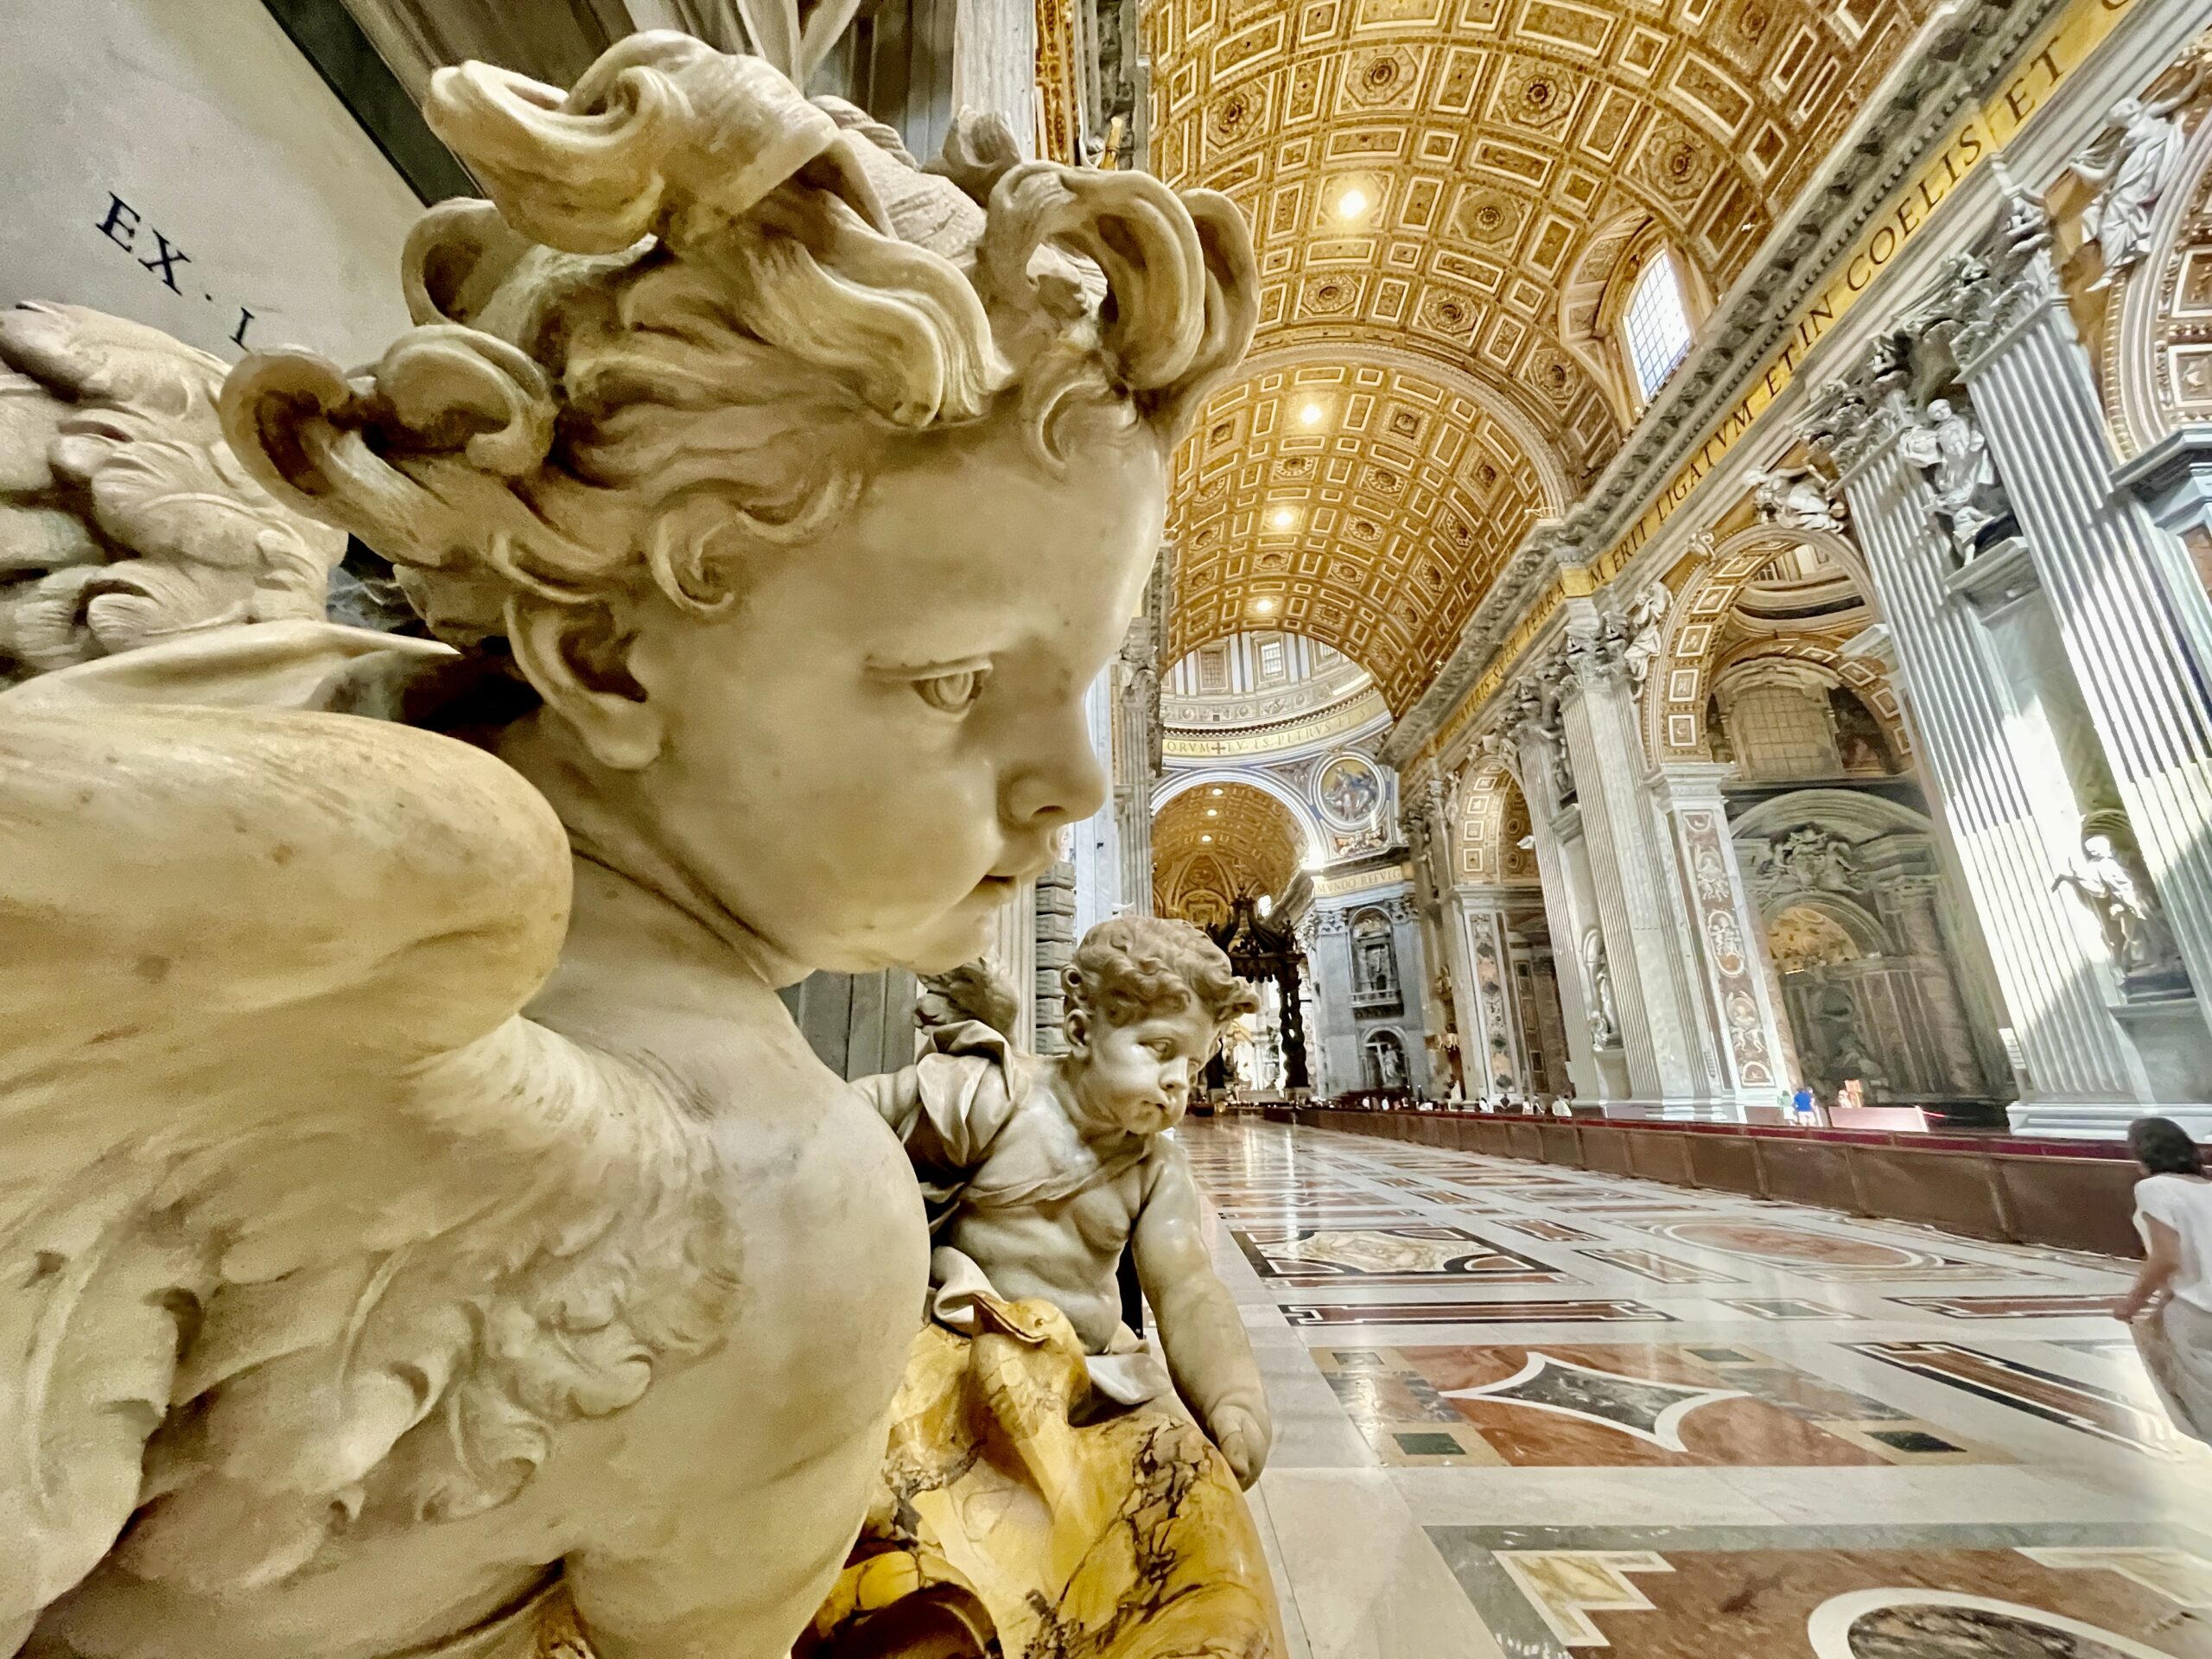 St Peter's Basilica Information | Have you been to St. Peters Basilica?